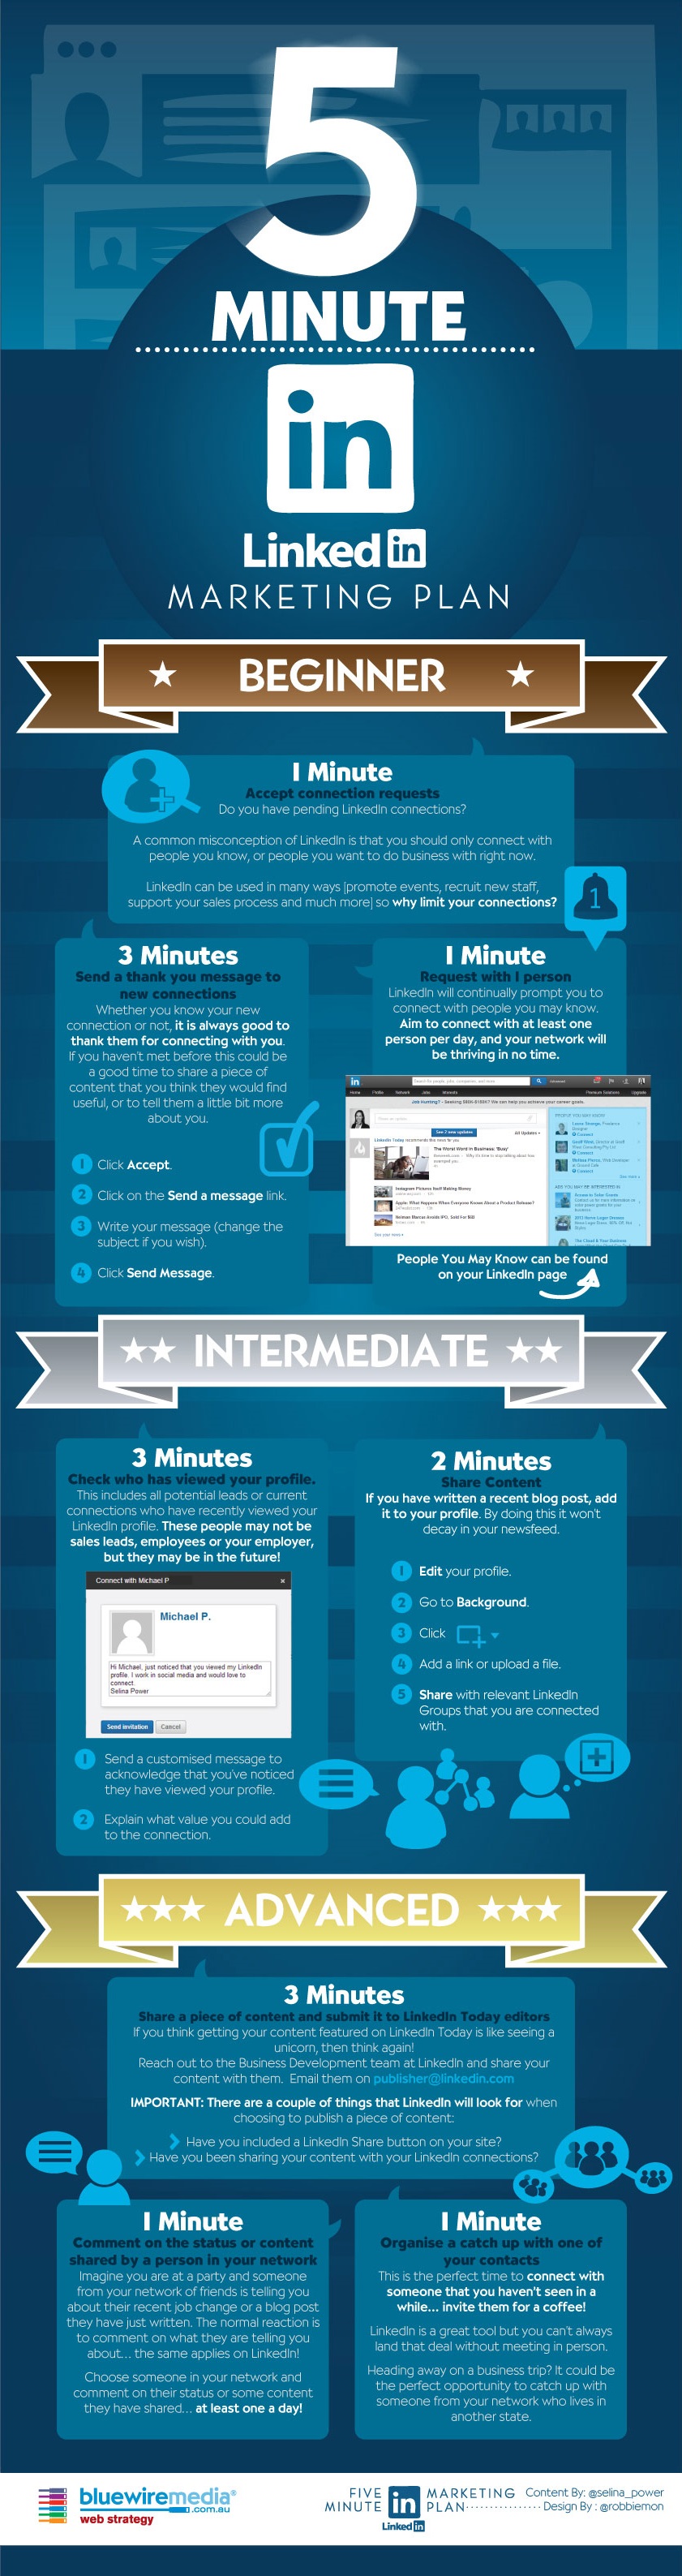 5-Minute-Linkedin-Mangement-Plan-for-Users-of-All-Levels